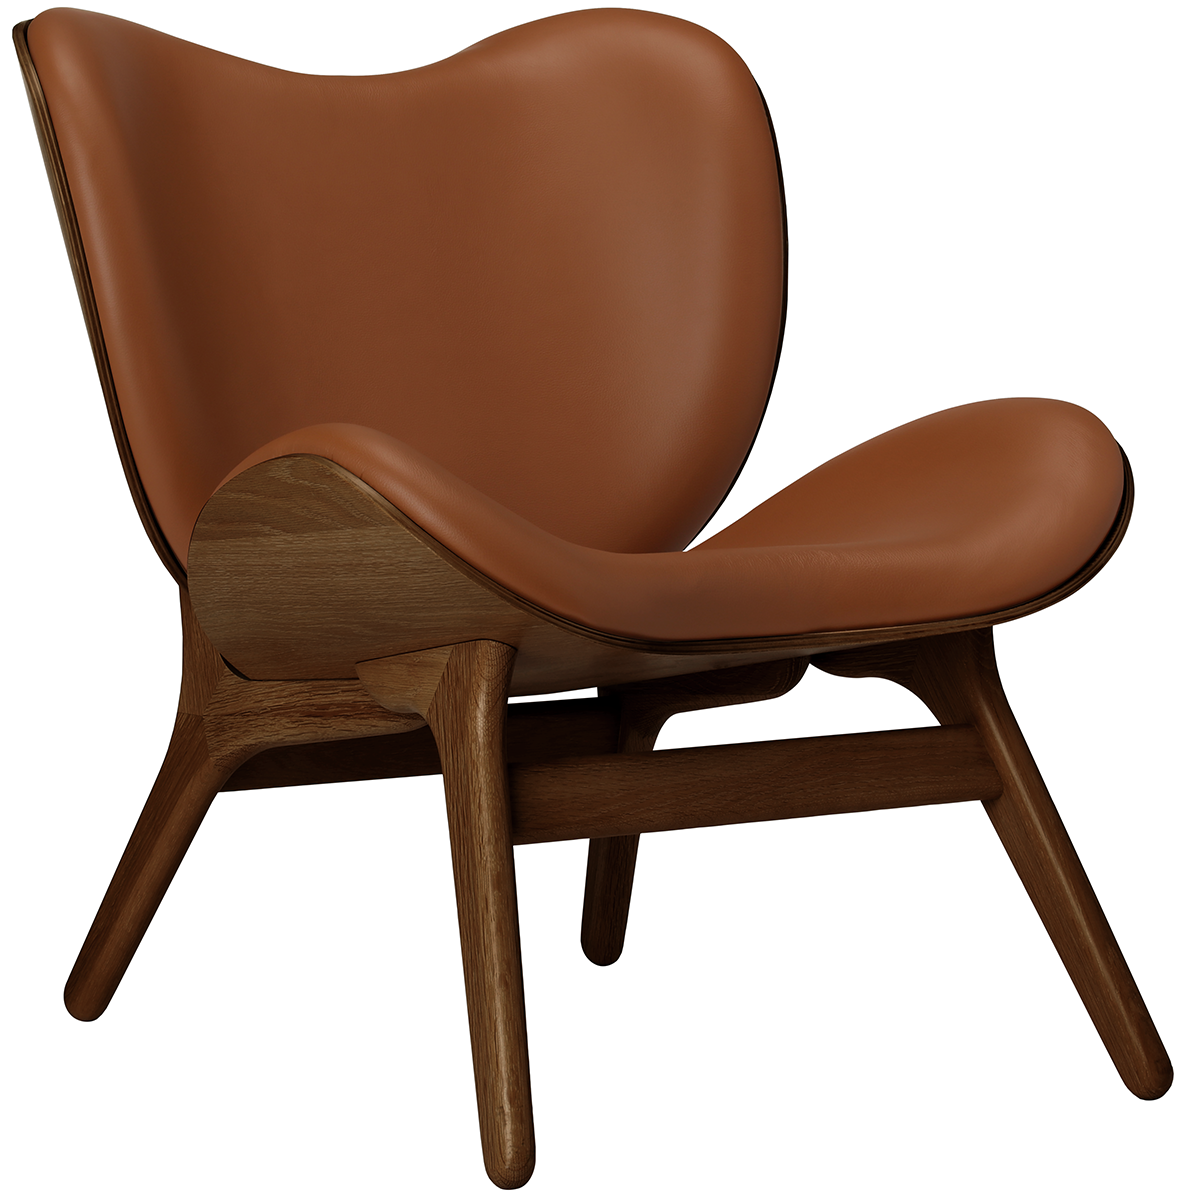 A Conversation Piece Leather Low Lounge Chair